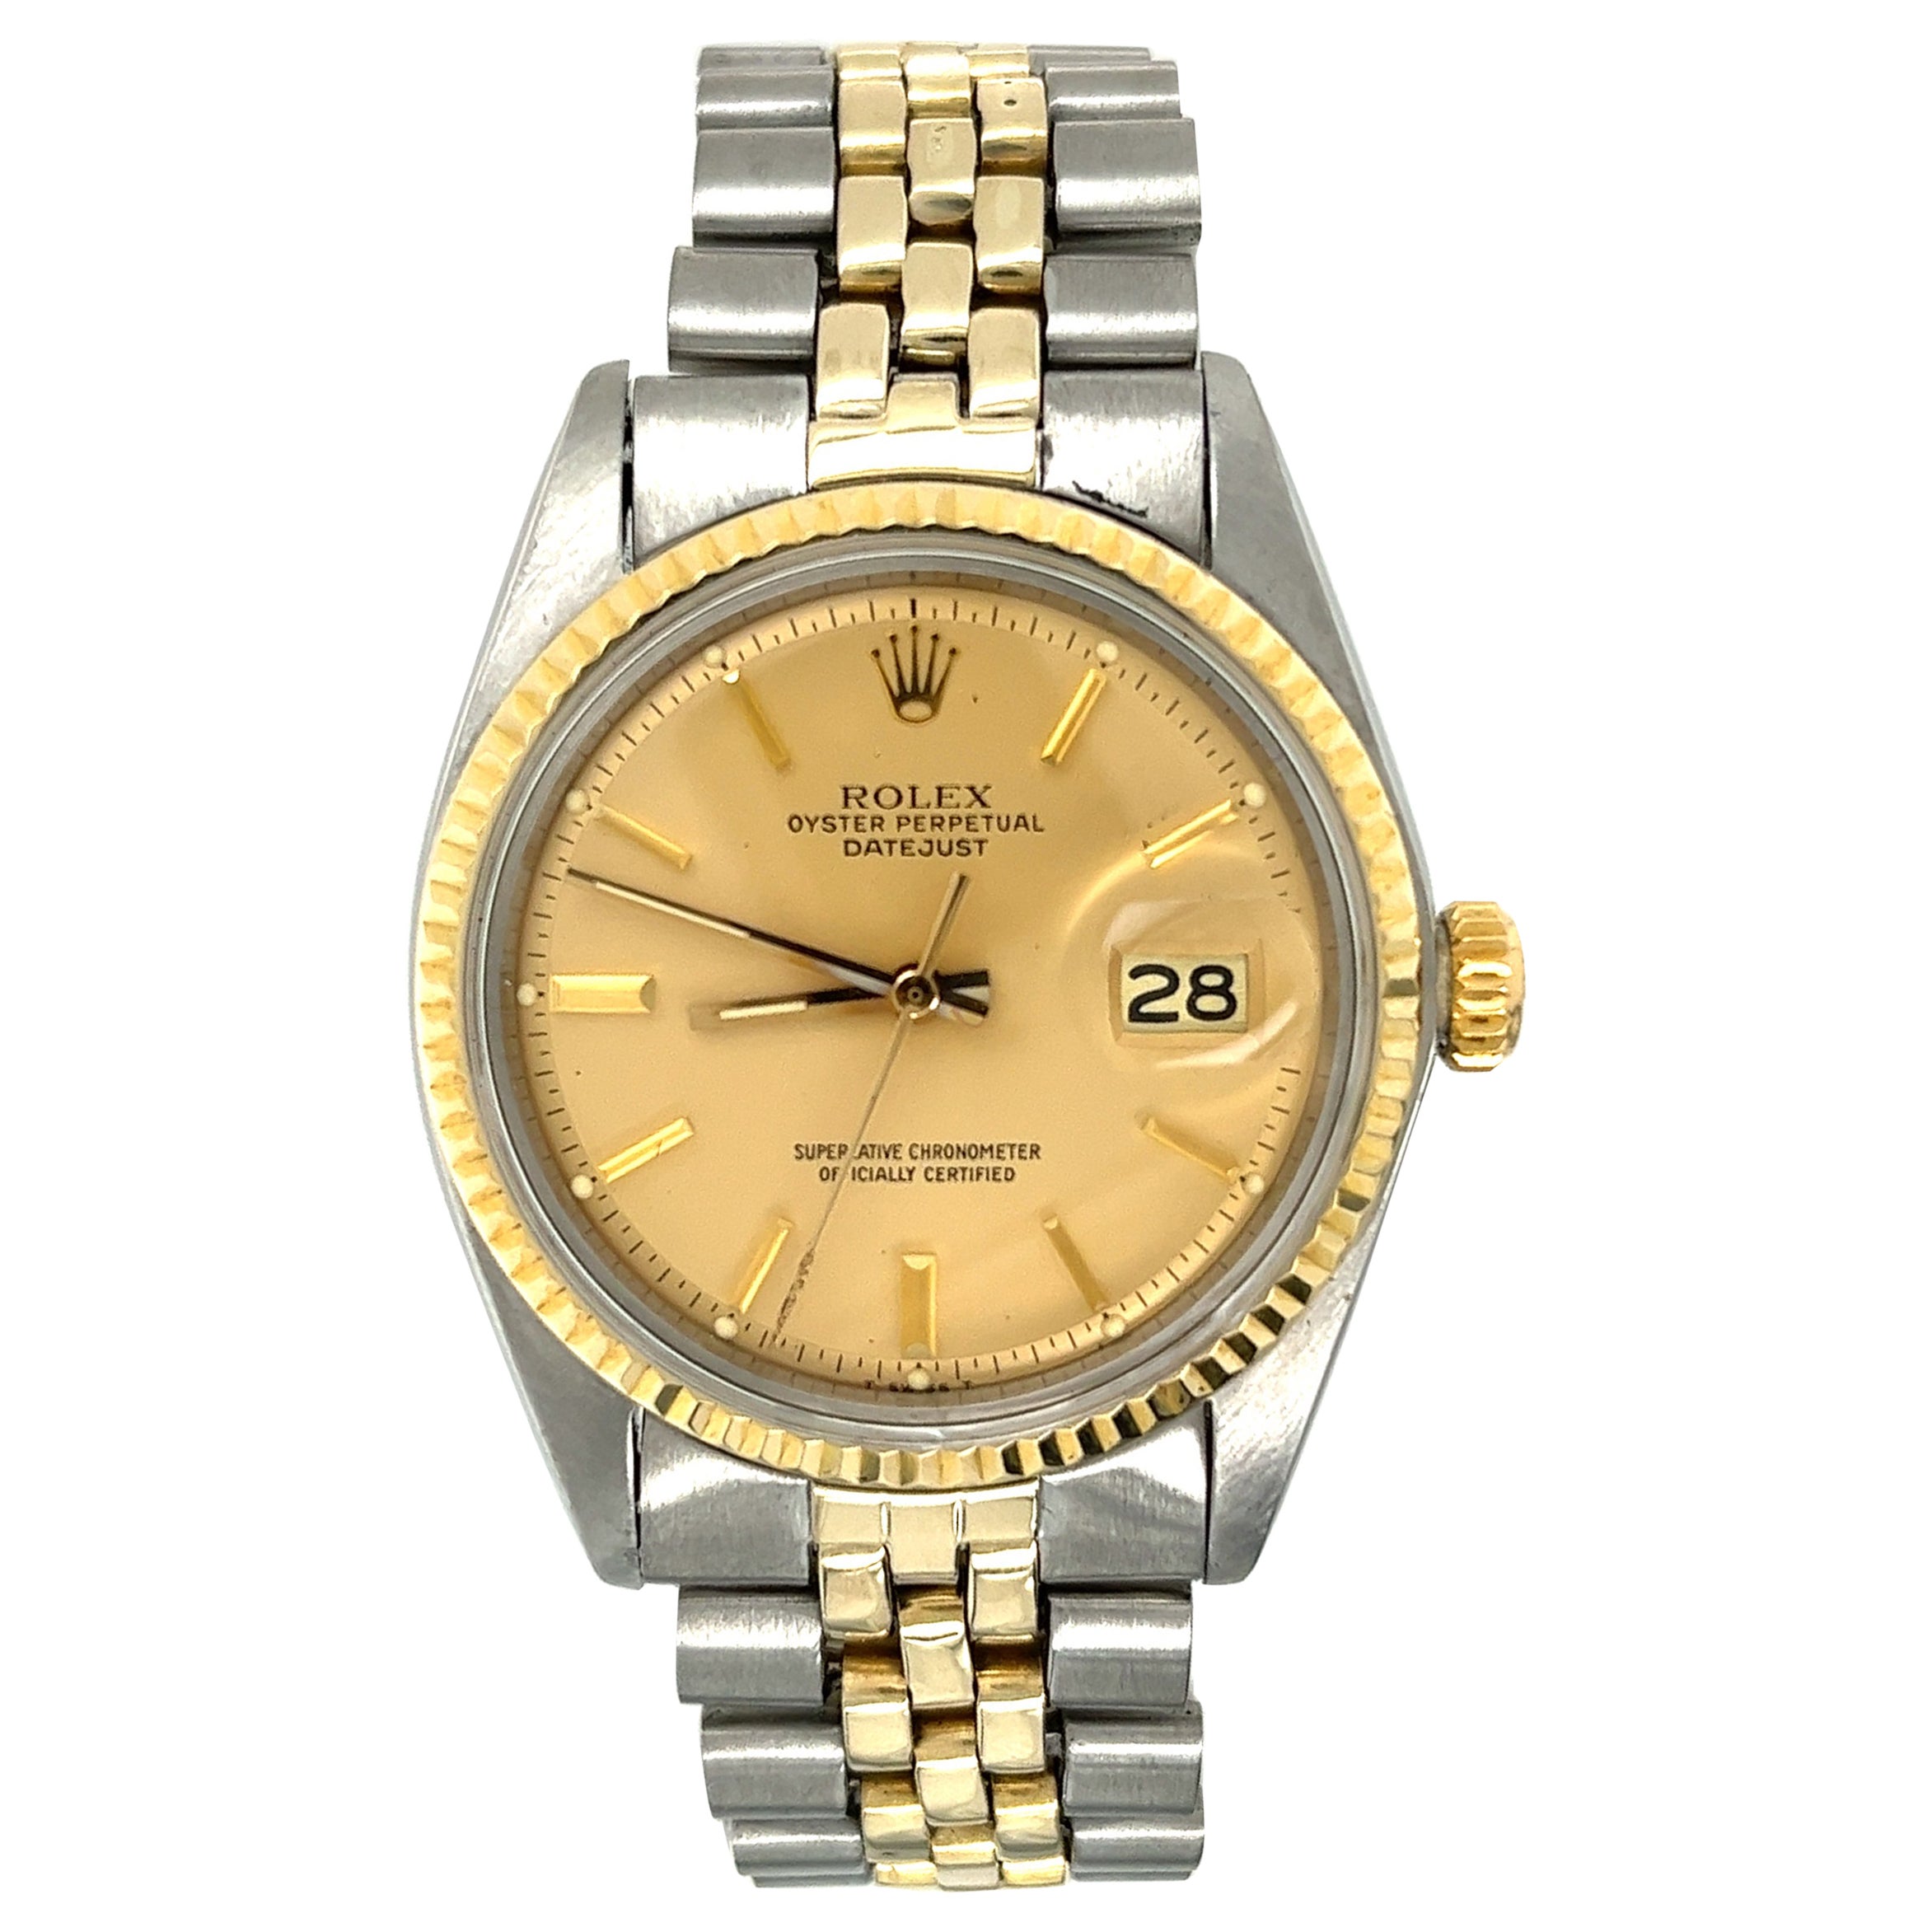 Vintage Rolex Datejust Two Tone Watch with Jubilee Bracelet For Sale